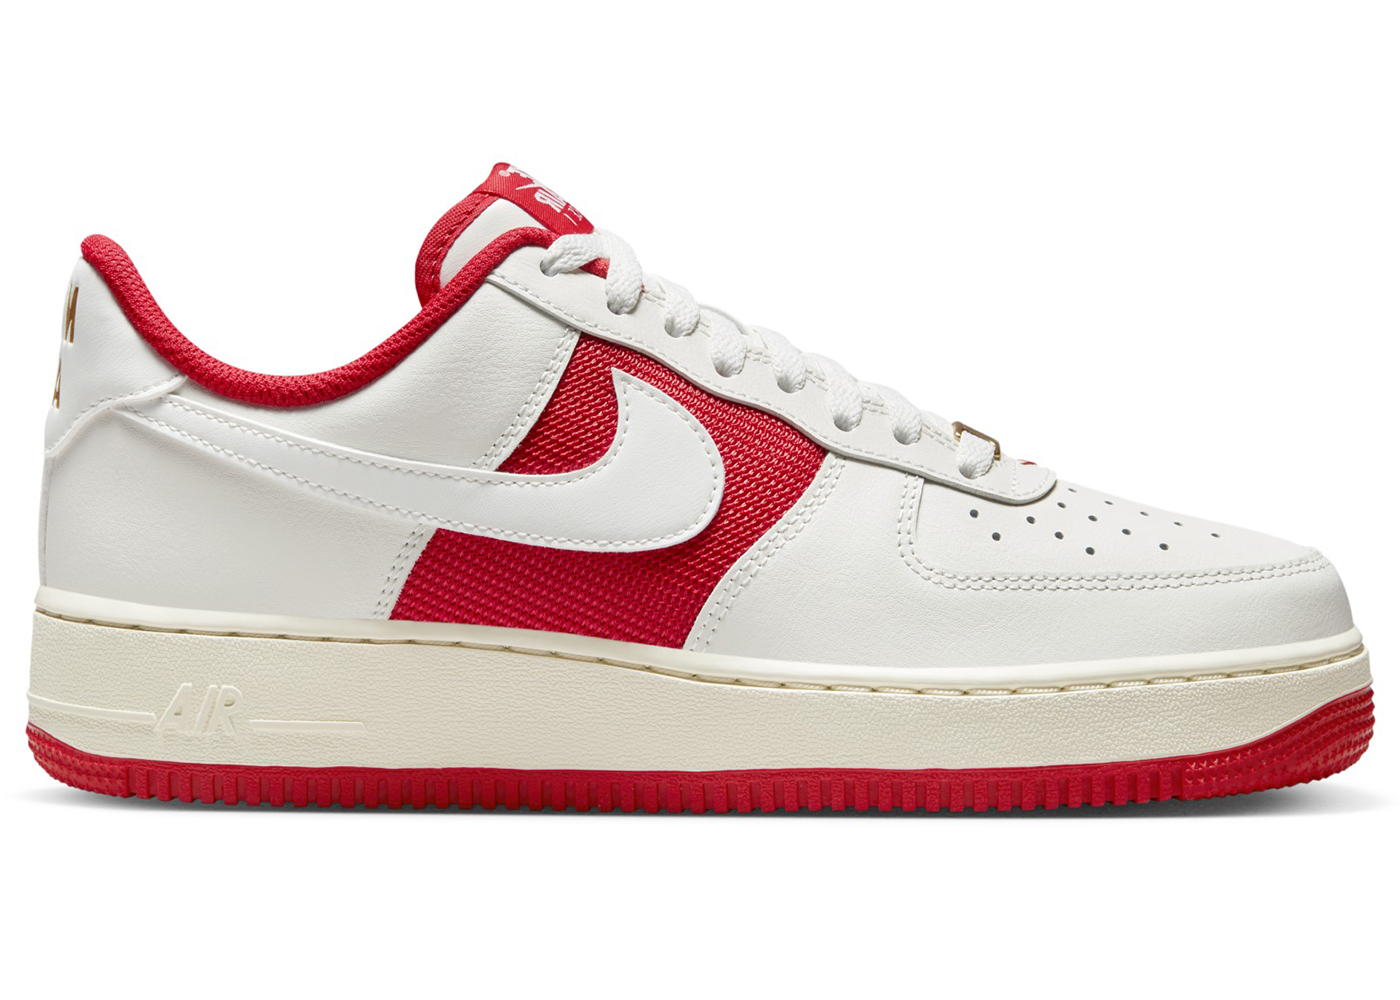 NIKE AIR FORCE 1 07 LV8 1 university red